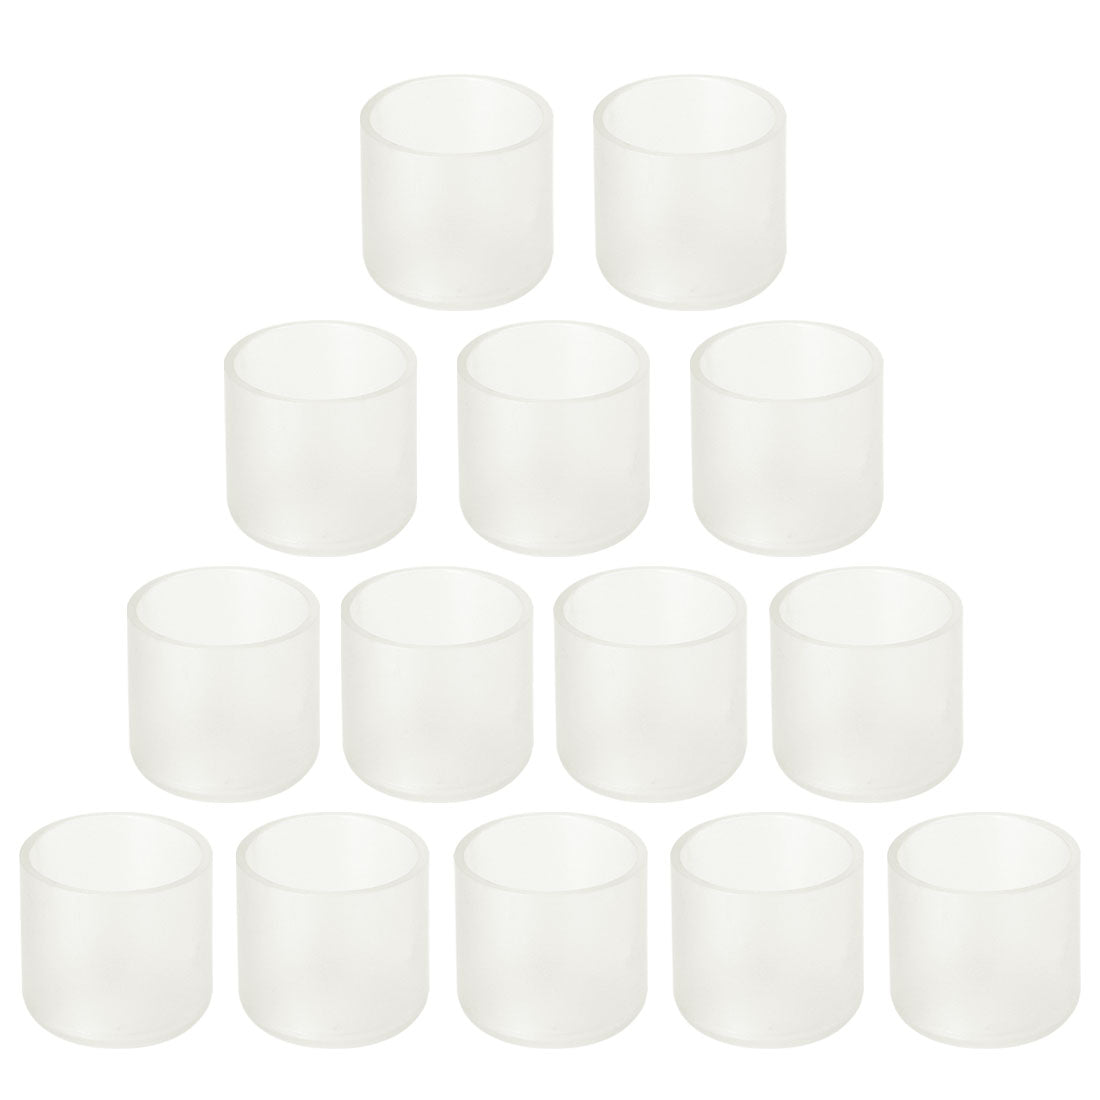 uxcell Uxcell Clear PVC Chair Leg Cap Table Pad Cover Furniture Glide Floor Protector 14pcs